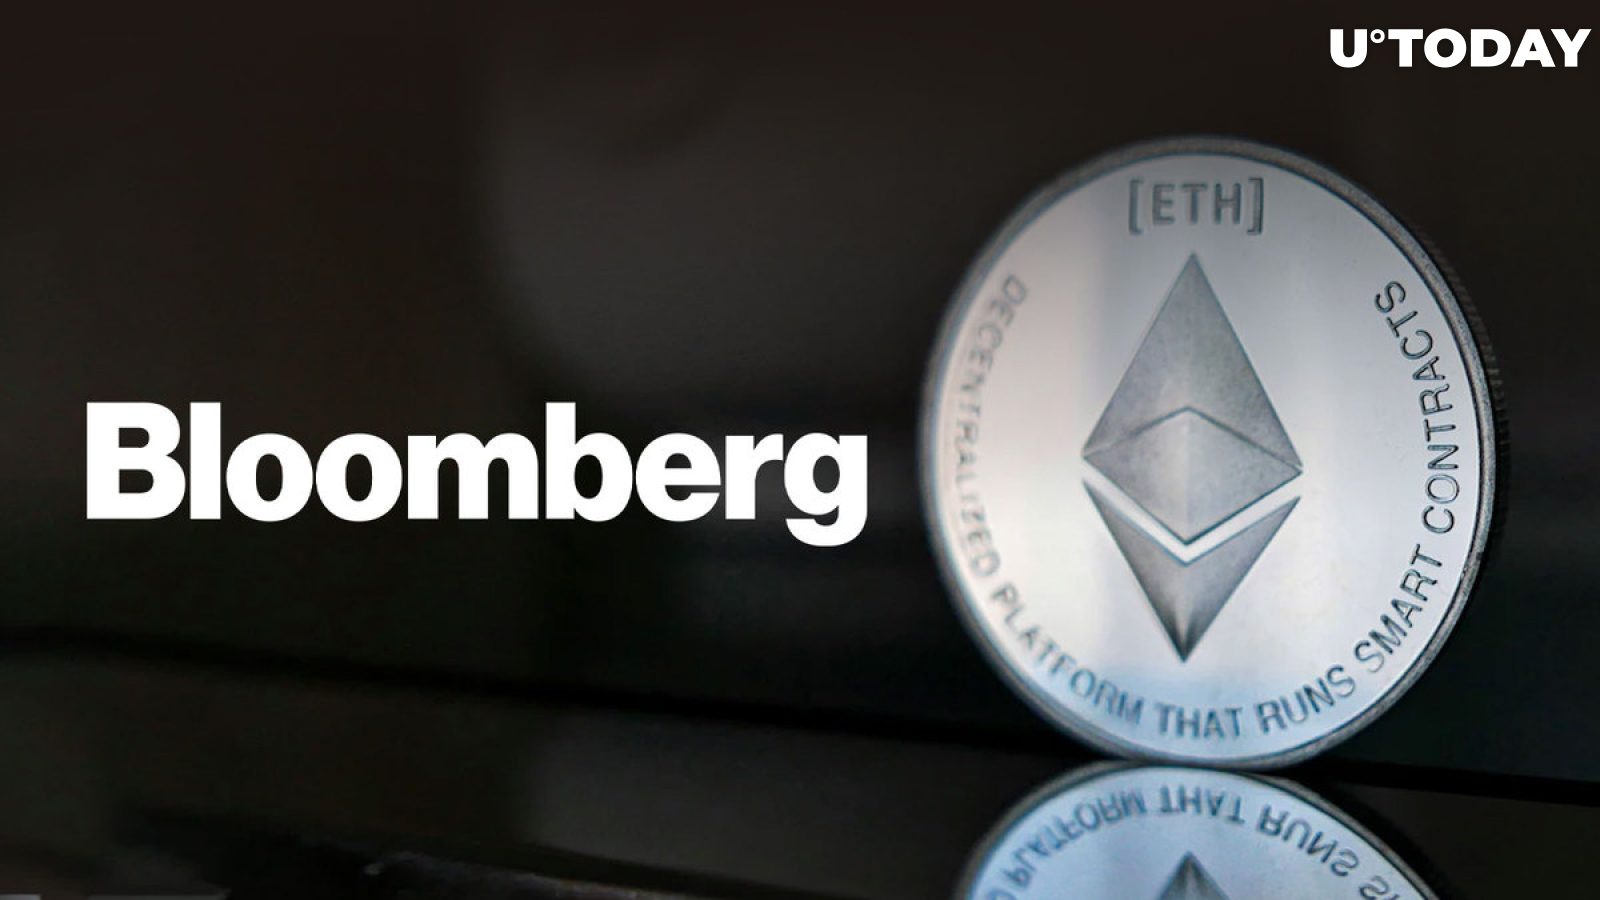 Bloomberg: Worst Week Since Mid-June for Ethereum